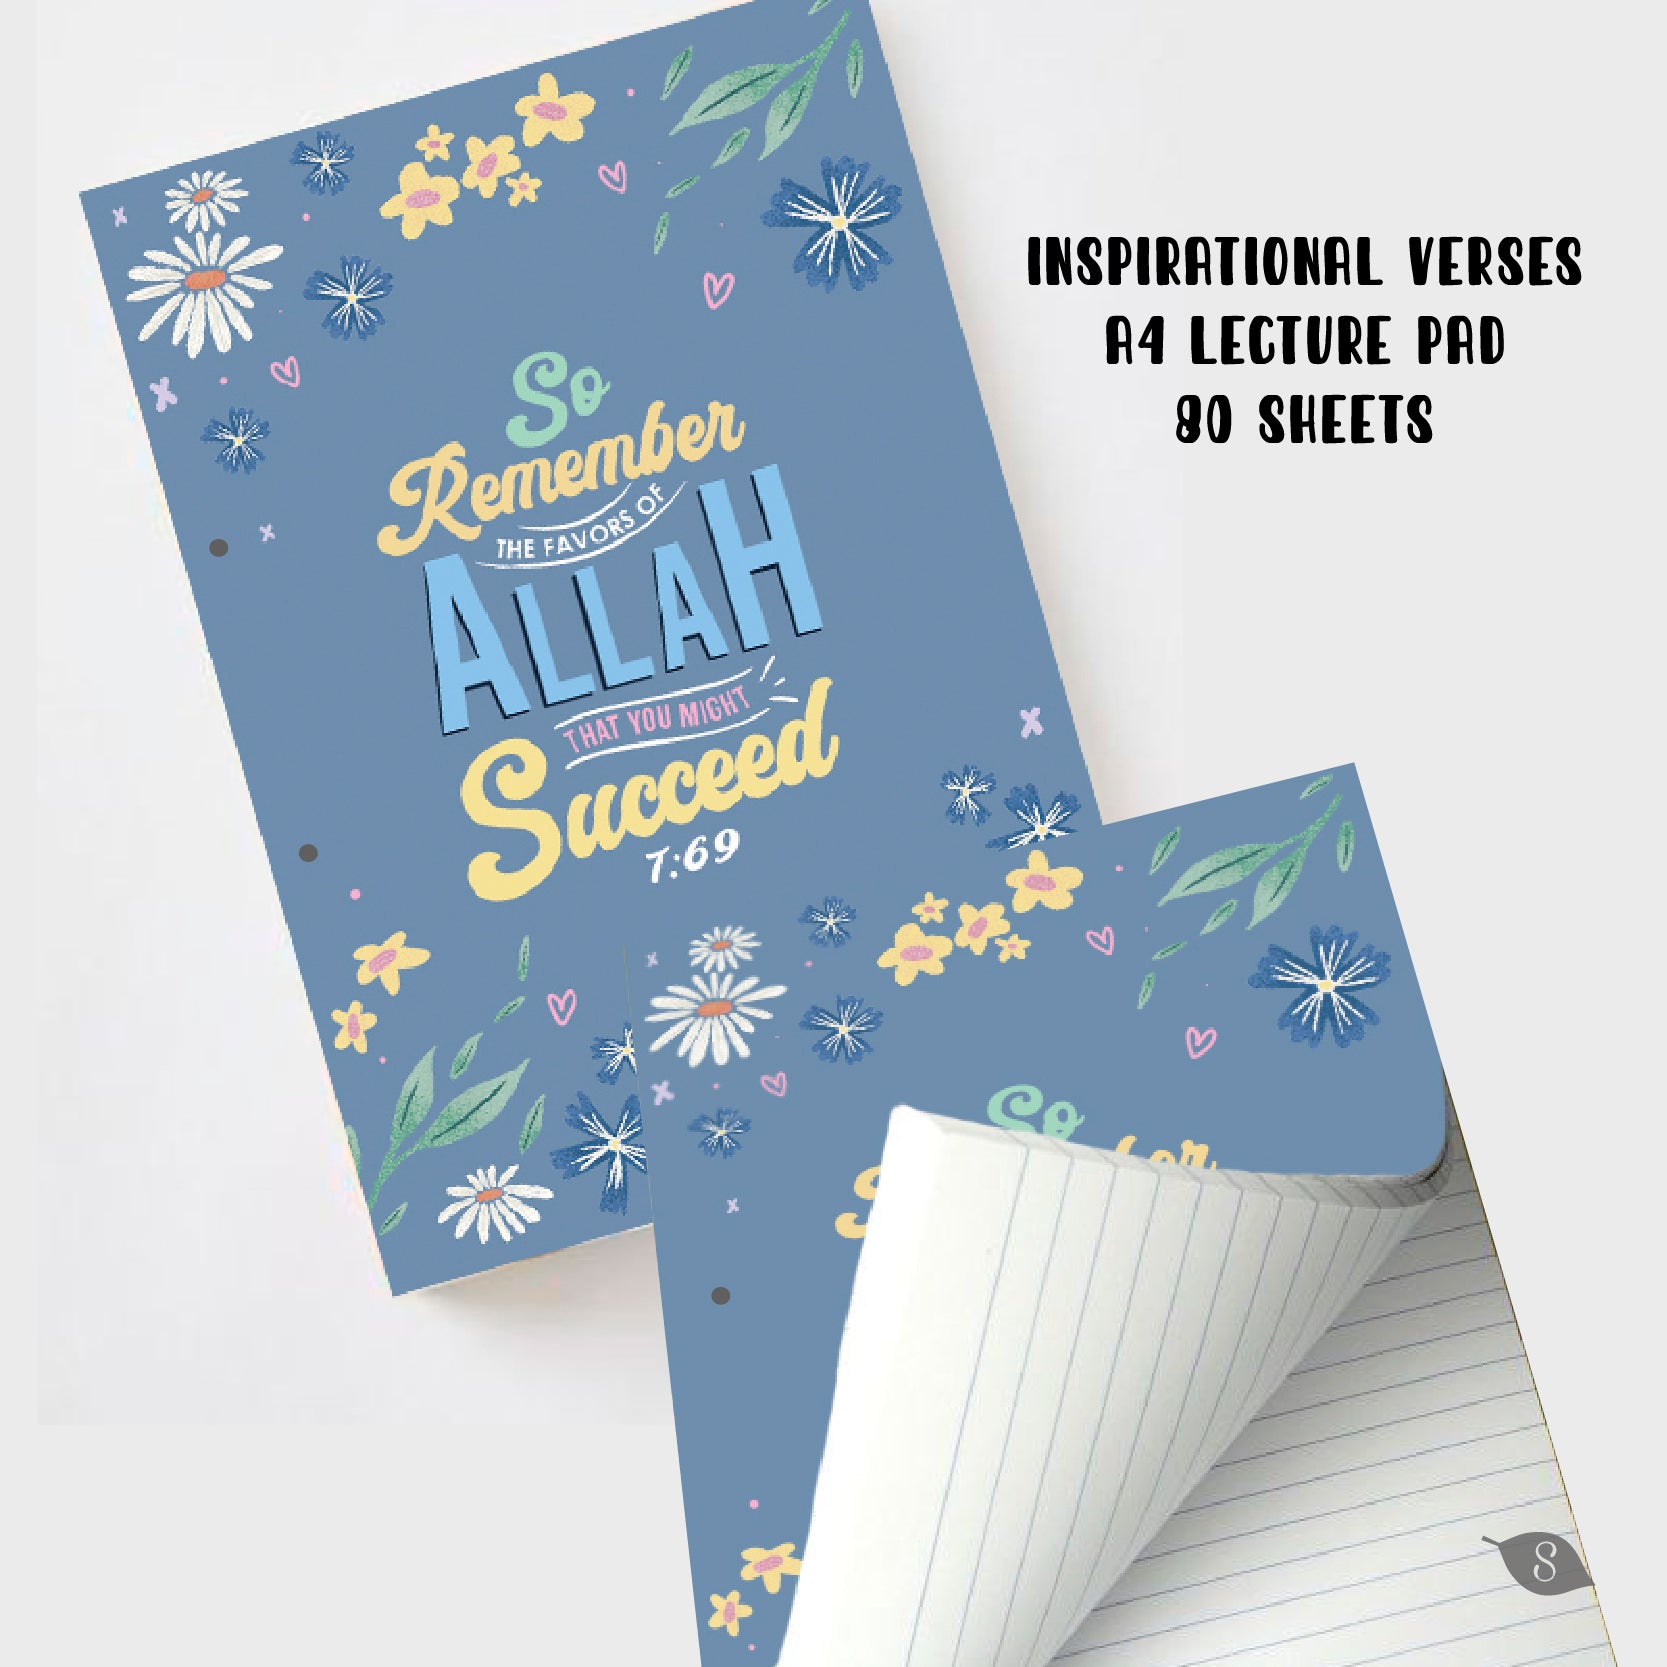 Faith Inspired Lecture Pad (5 Designs)